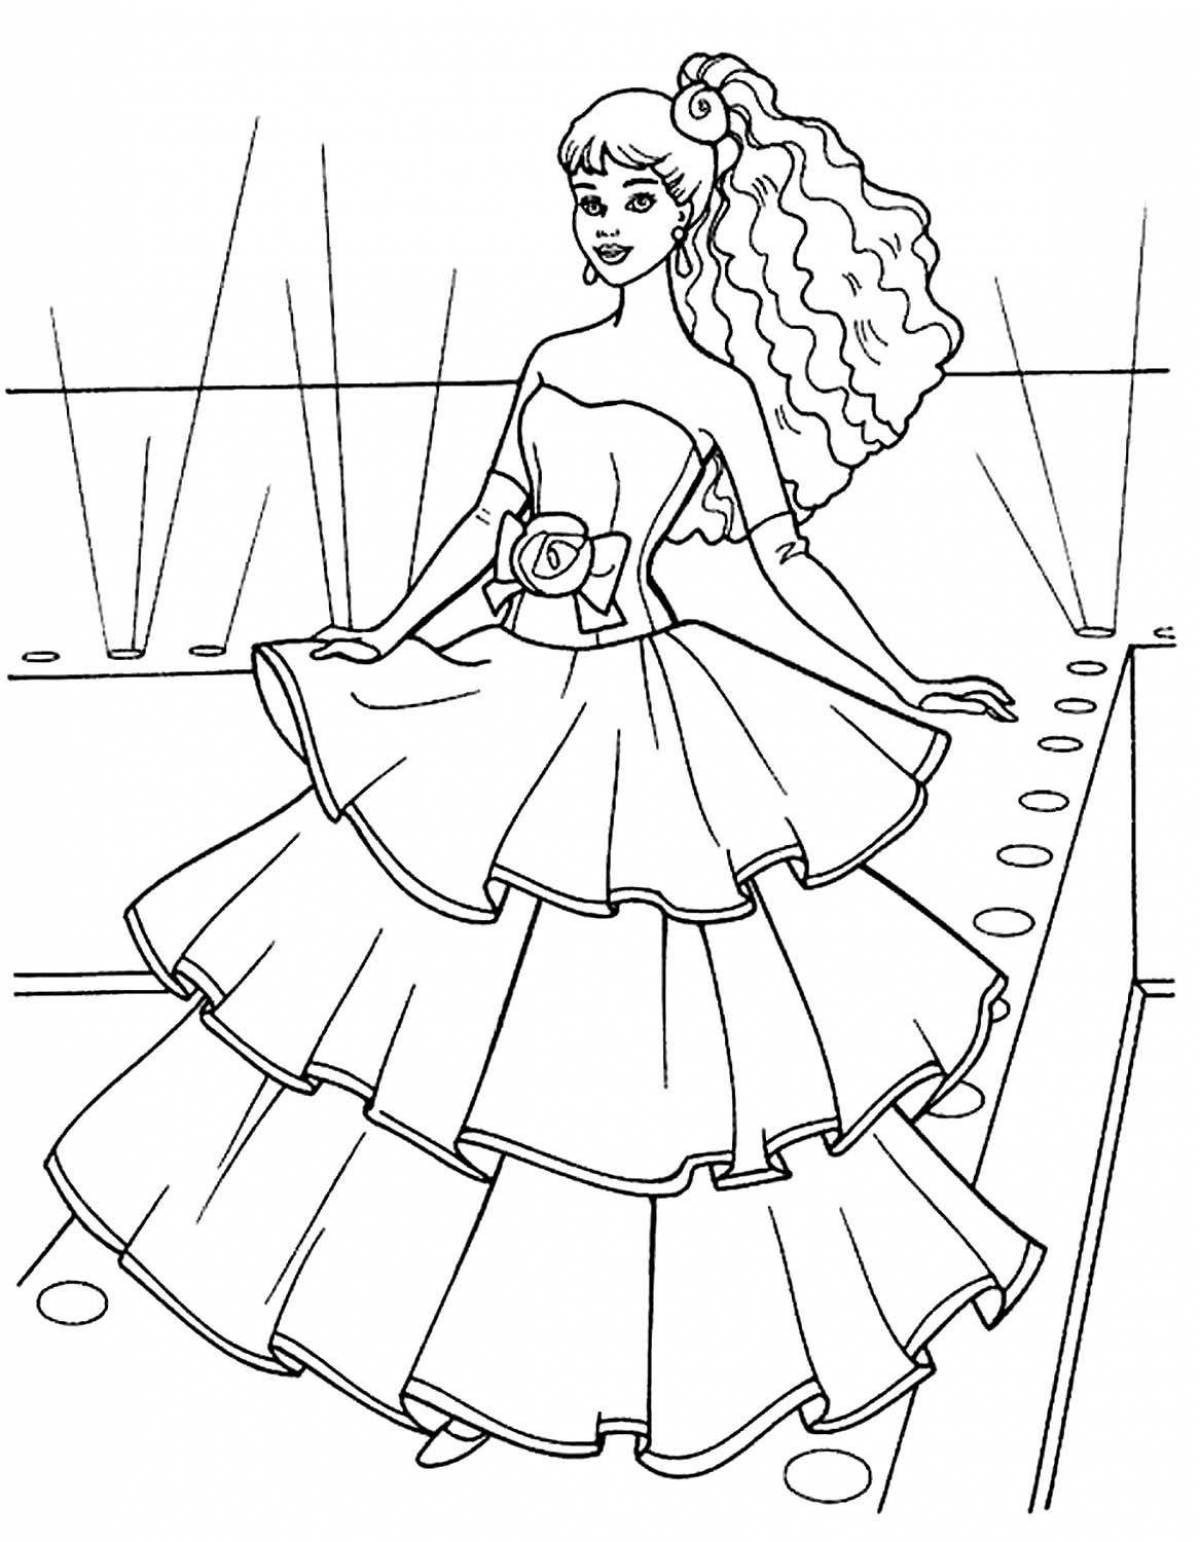 Luxurious coloring of barbie in a dress